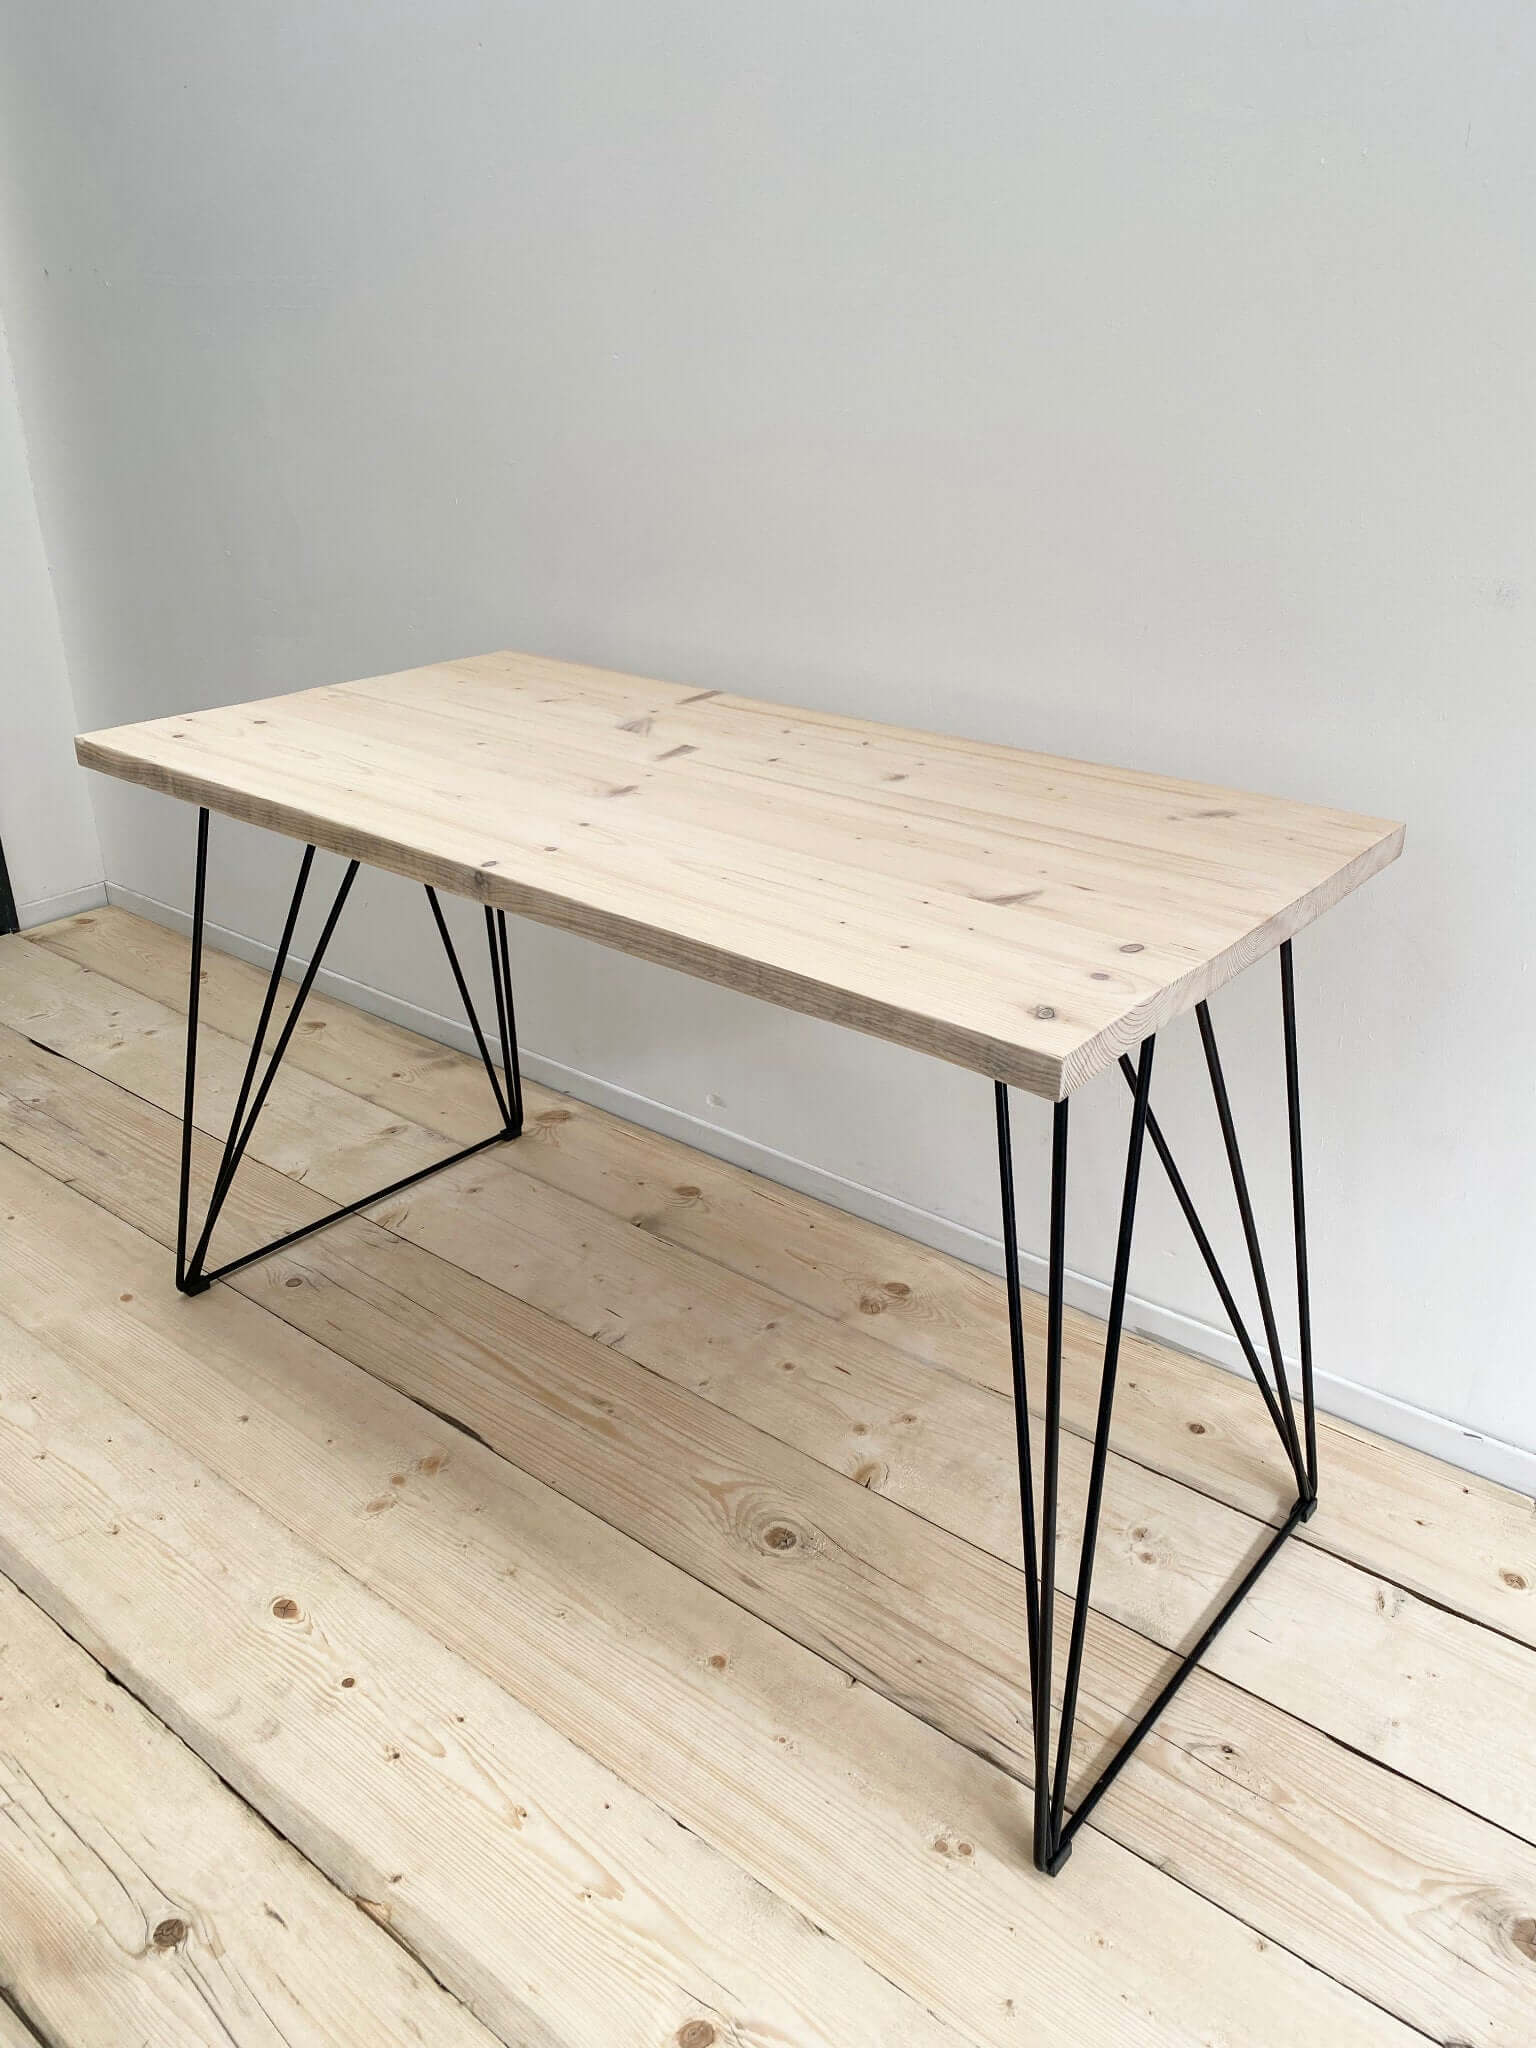 Reclaimed wood desk with industrial legs.